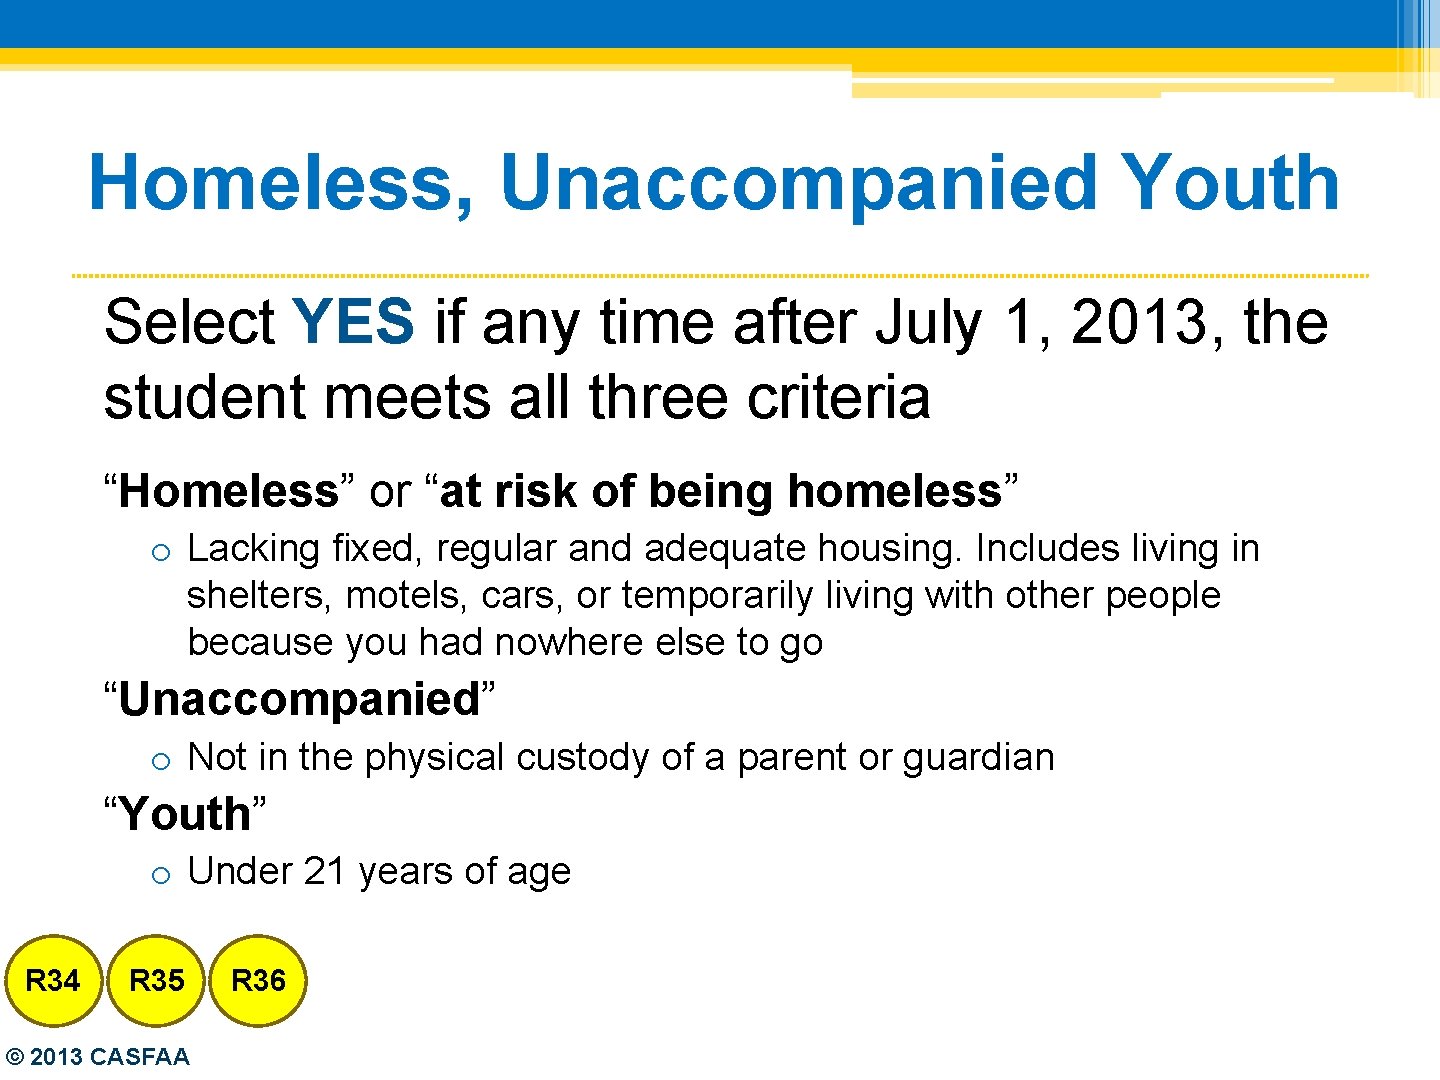 Homeless, Unaccompanied Youth Select YES if any time after July 1, 2013, the student